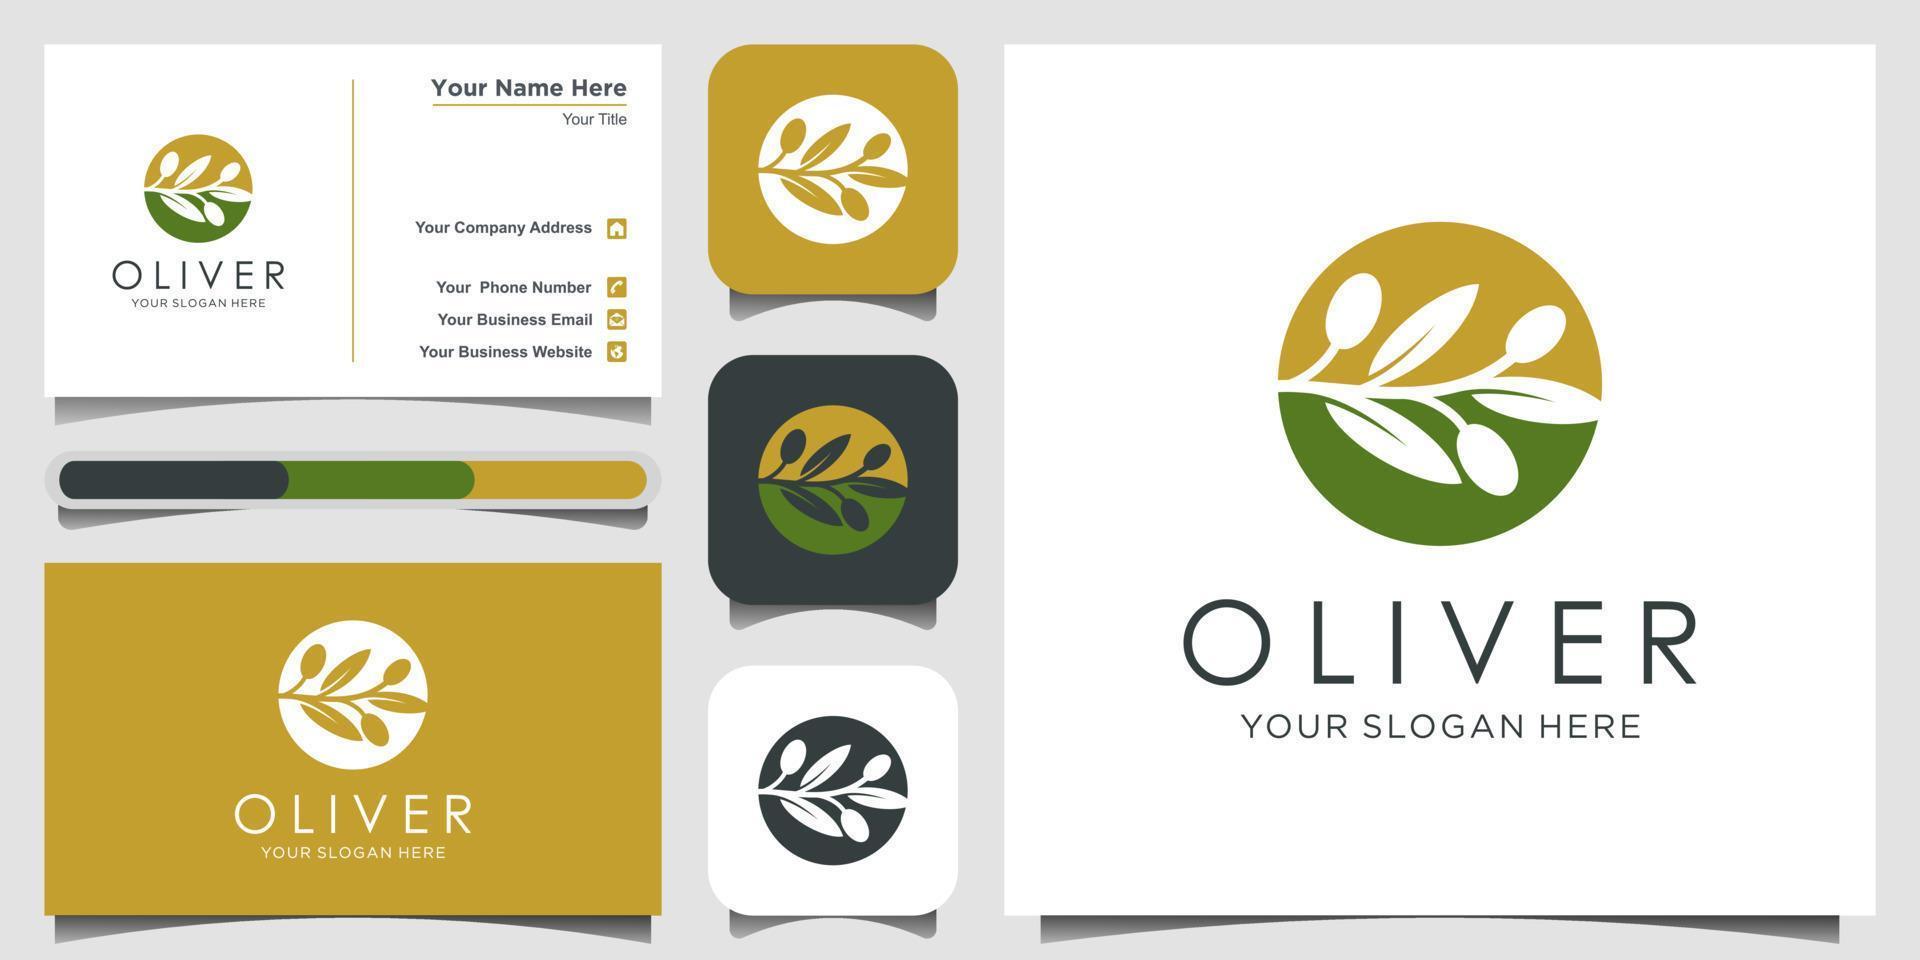 Olive Oil with negative space logo design concept. logo design, icon and business card vector